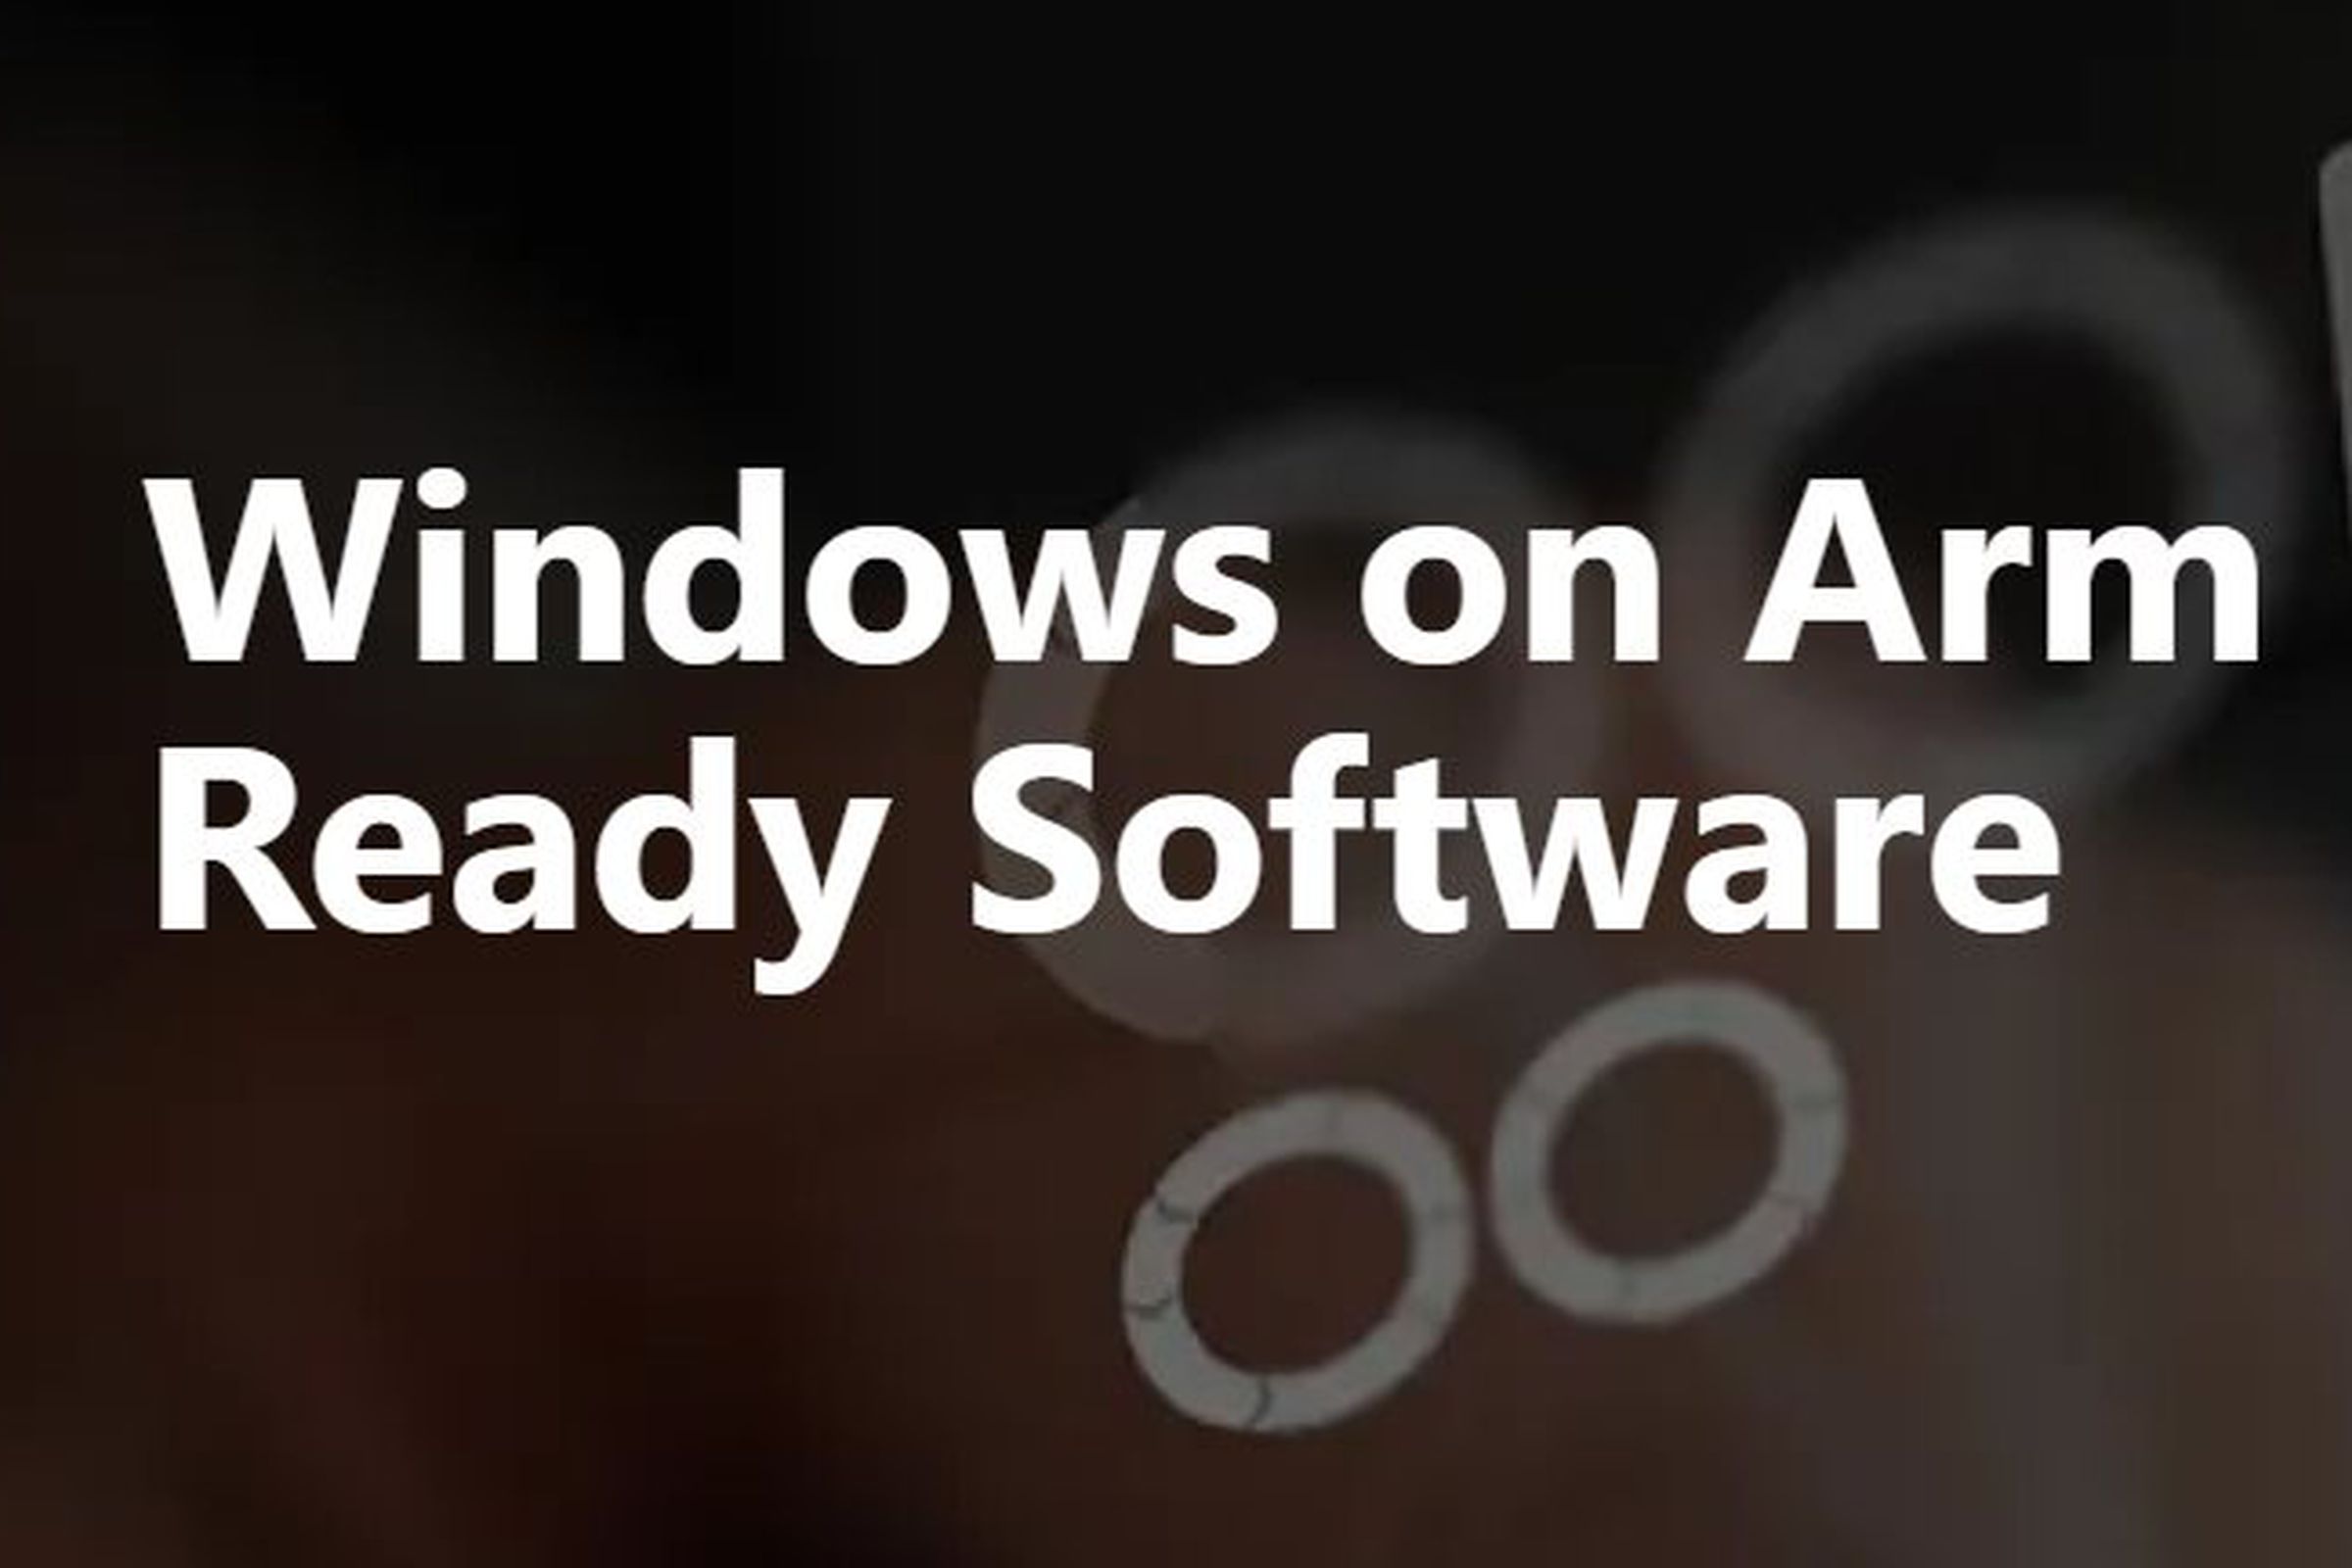 “Windows on Arm Ready Software” reads text on a blurry background.